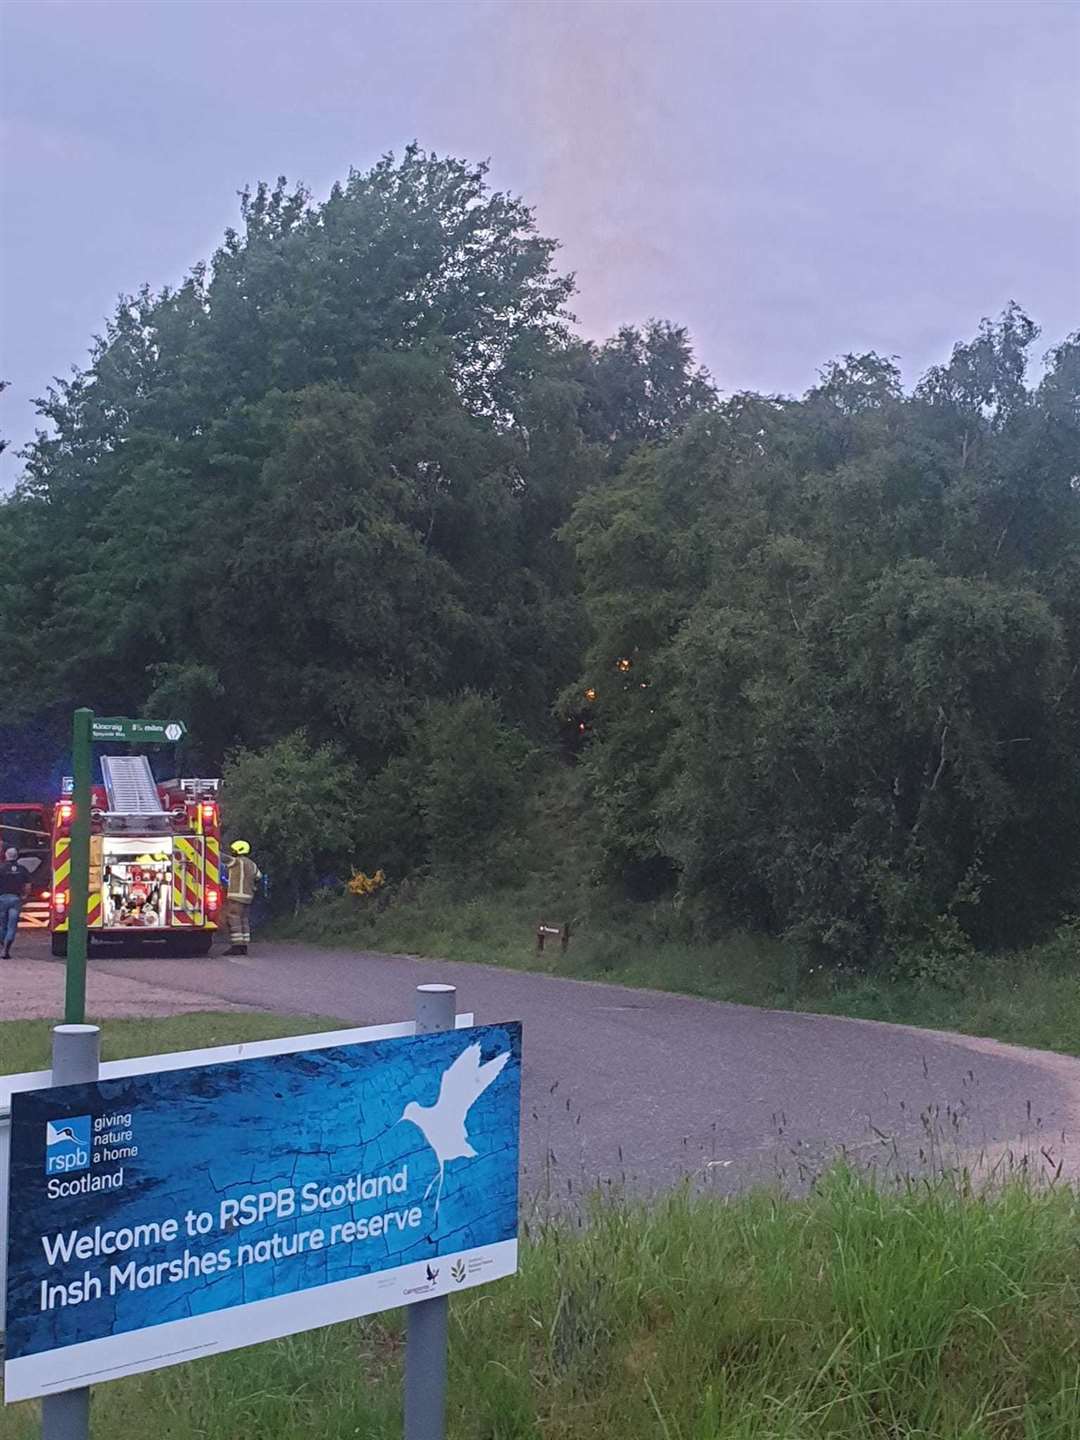 The fire at Insh Marshes is ongoing. Photo: Clare Mccusker